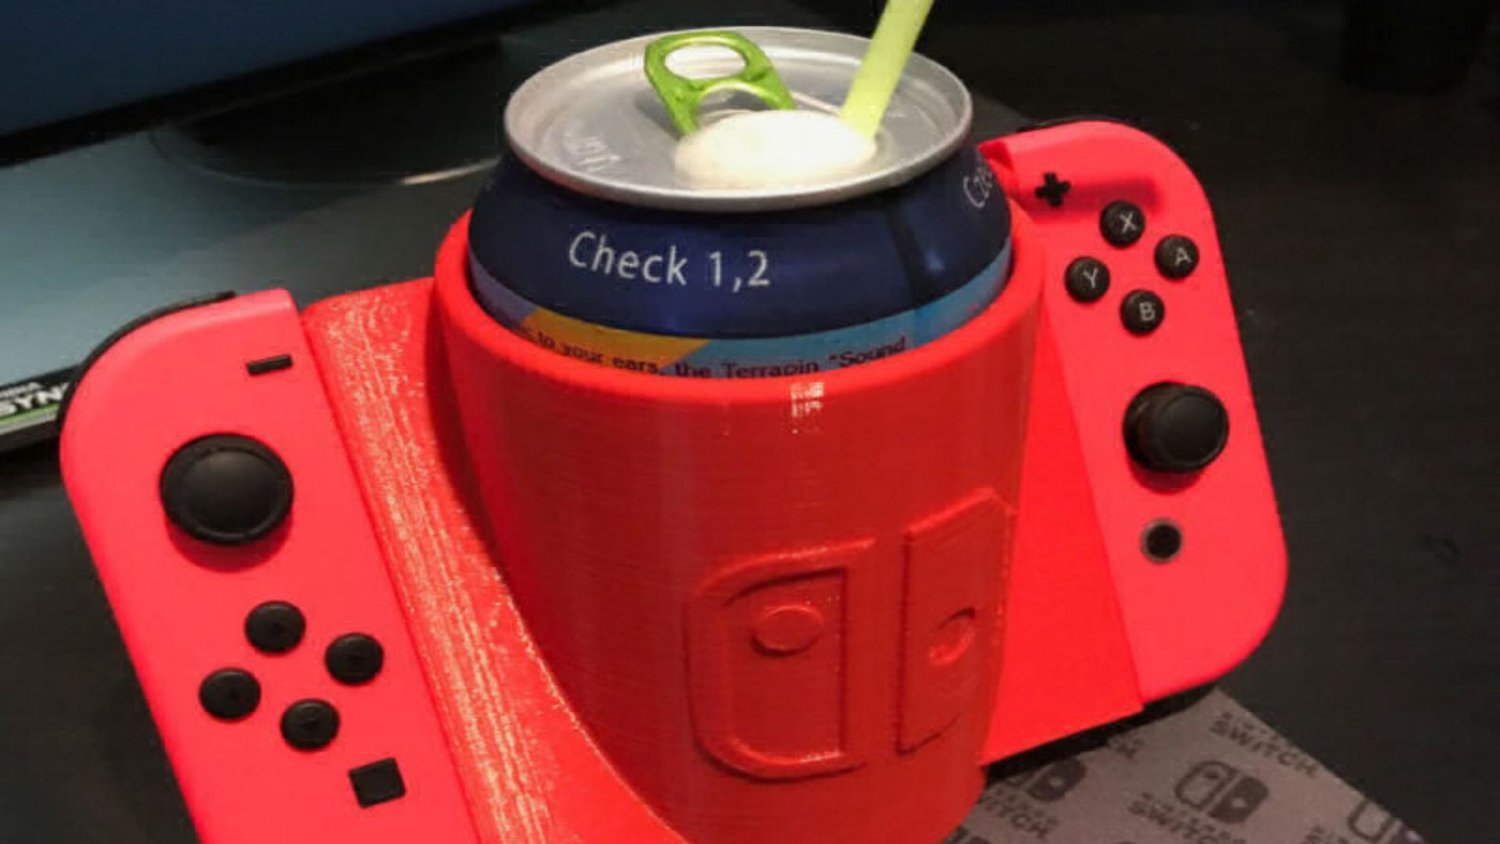 You can 3D Print Your Very Own NINTENDO SWITCH With This Design